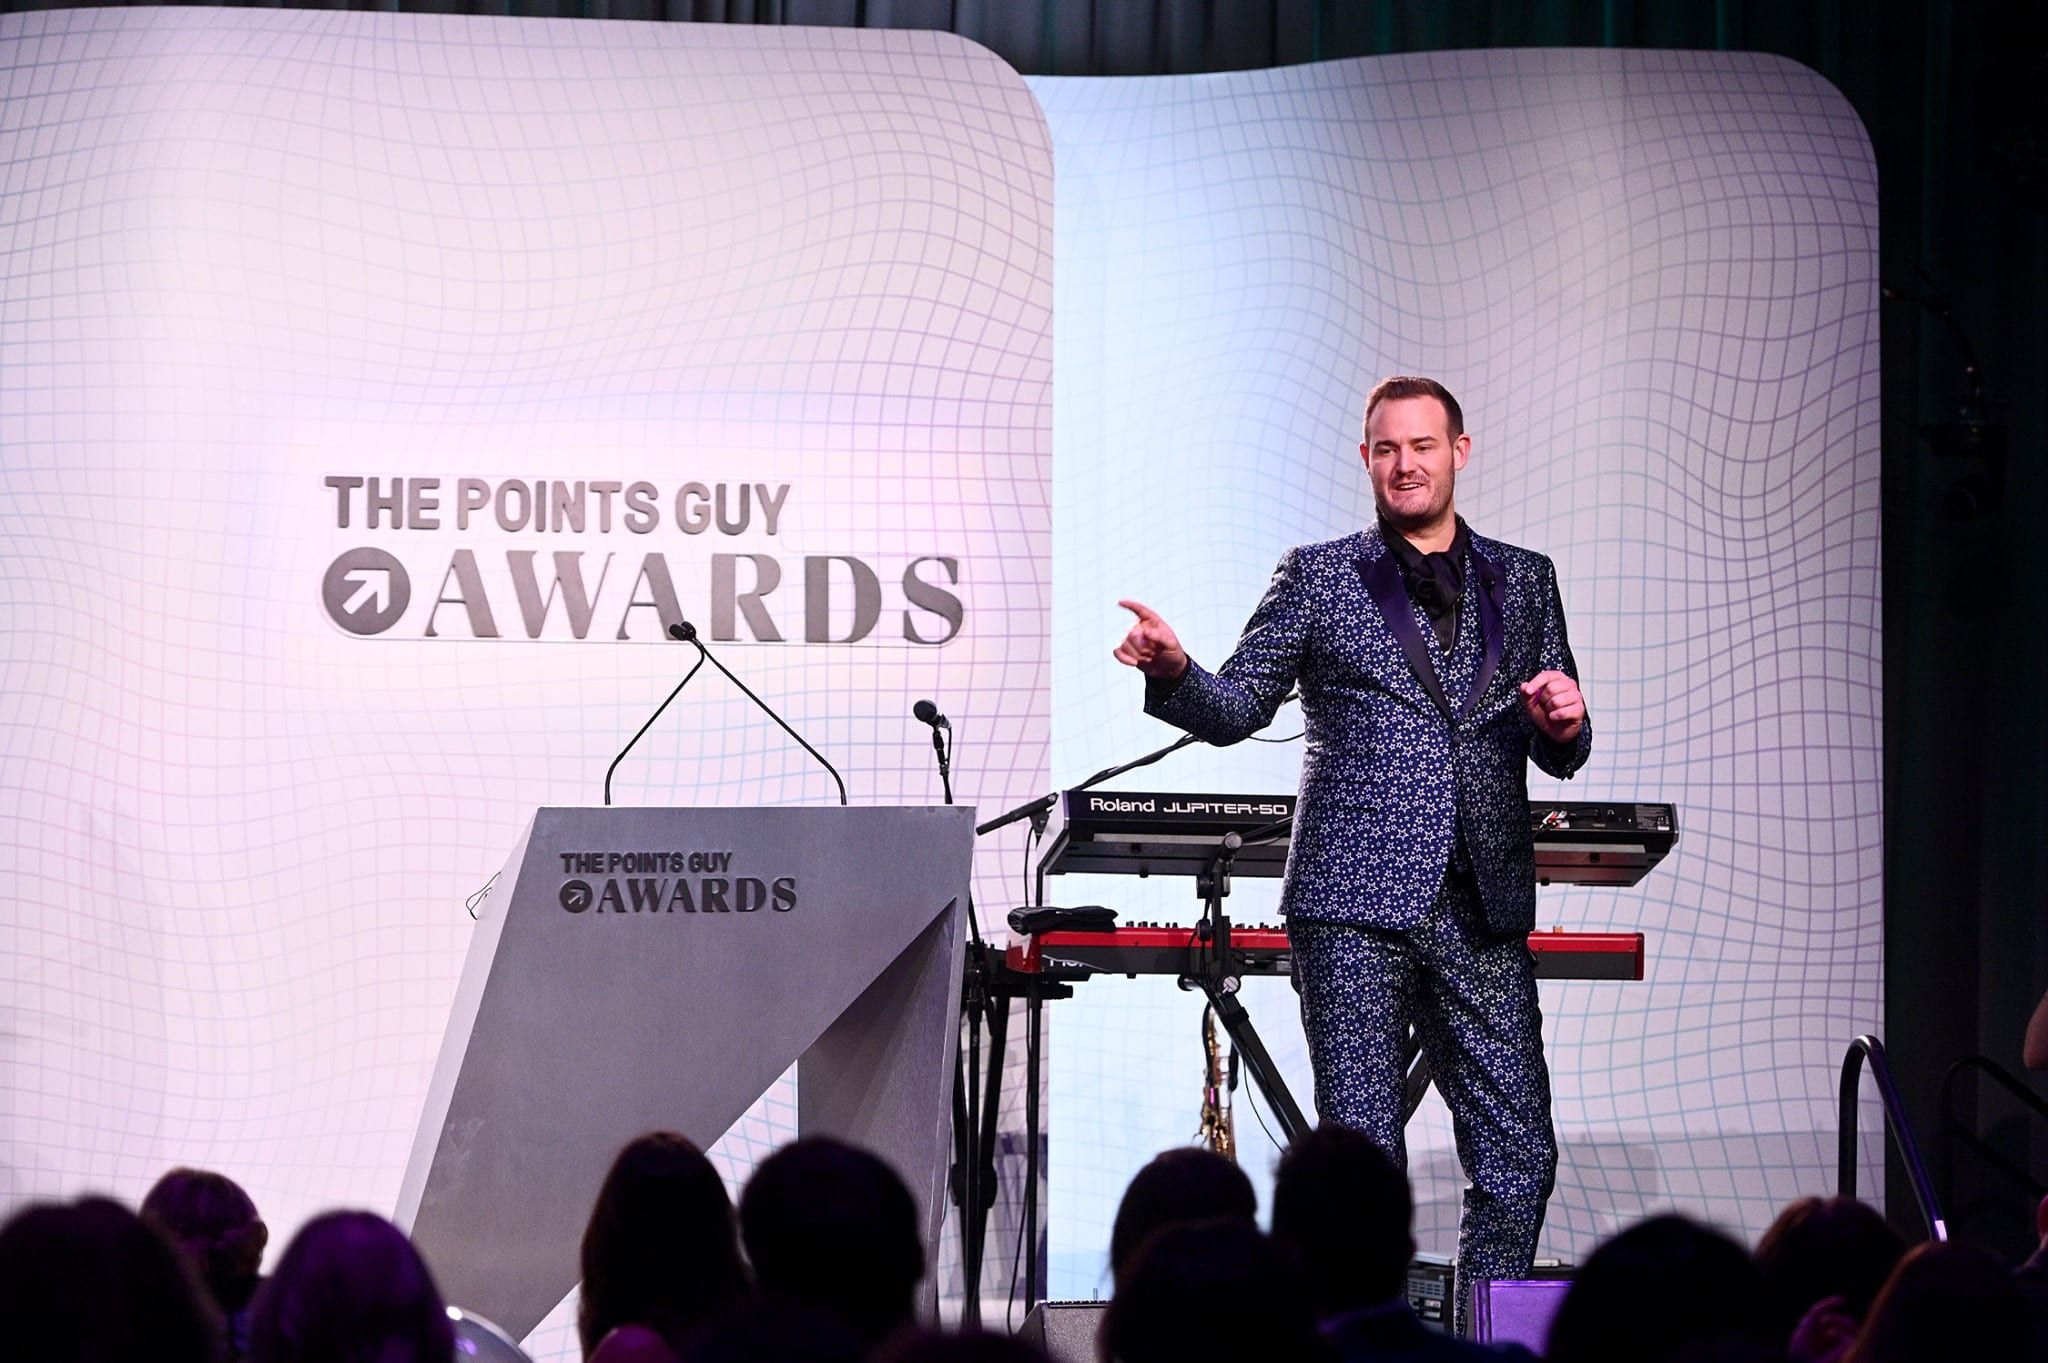 the points guy - Top Travel Providers 2019